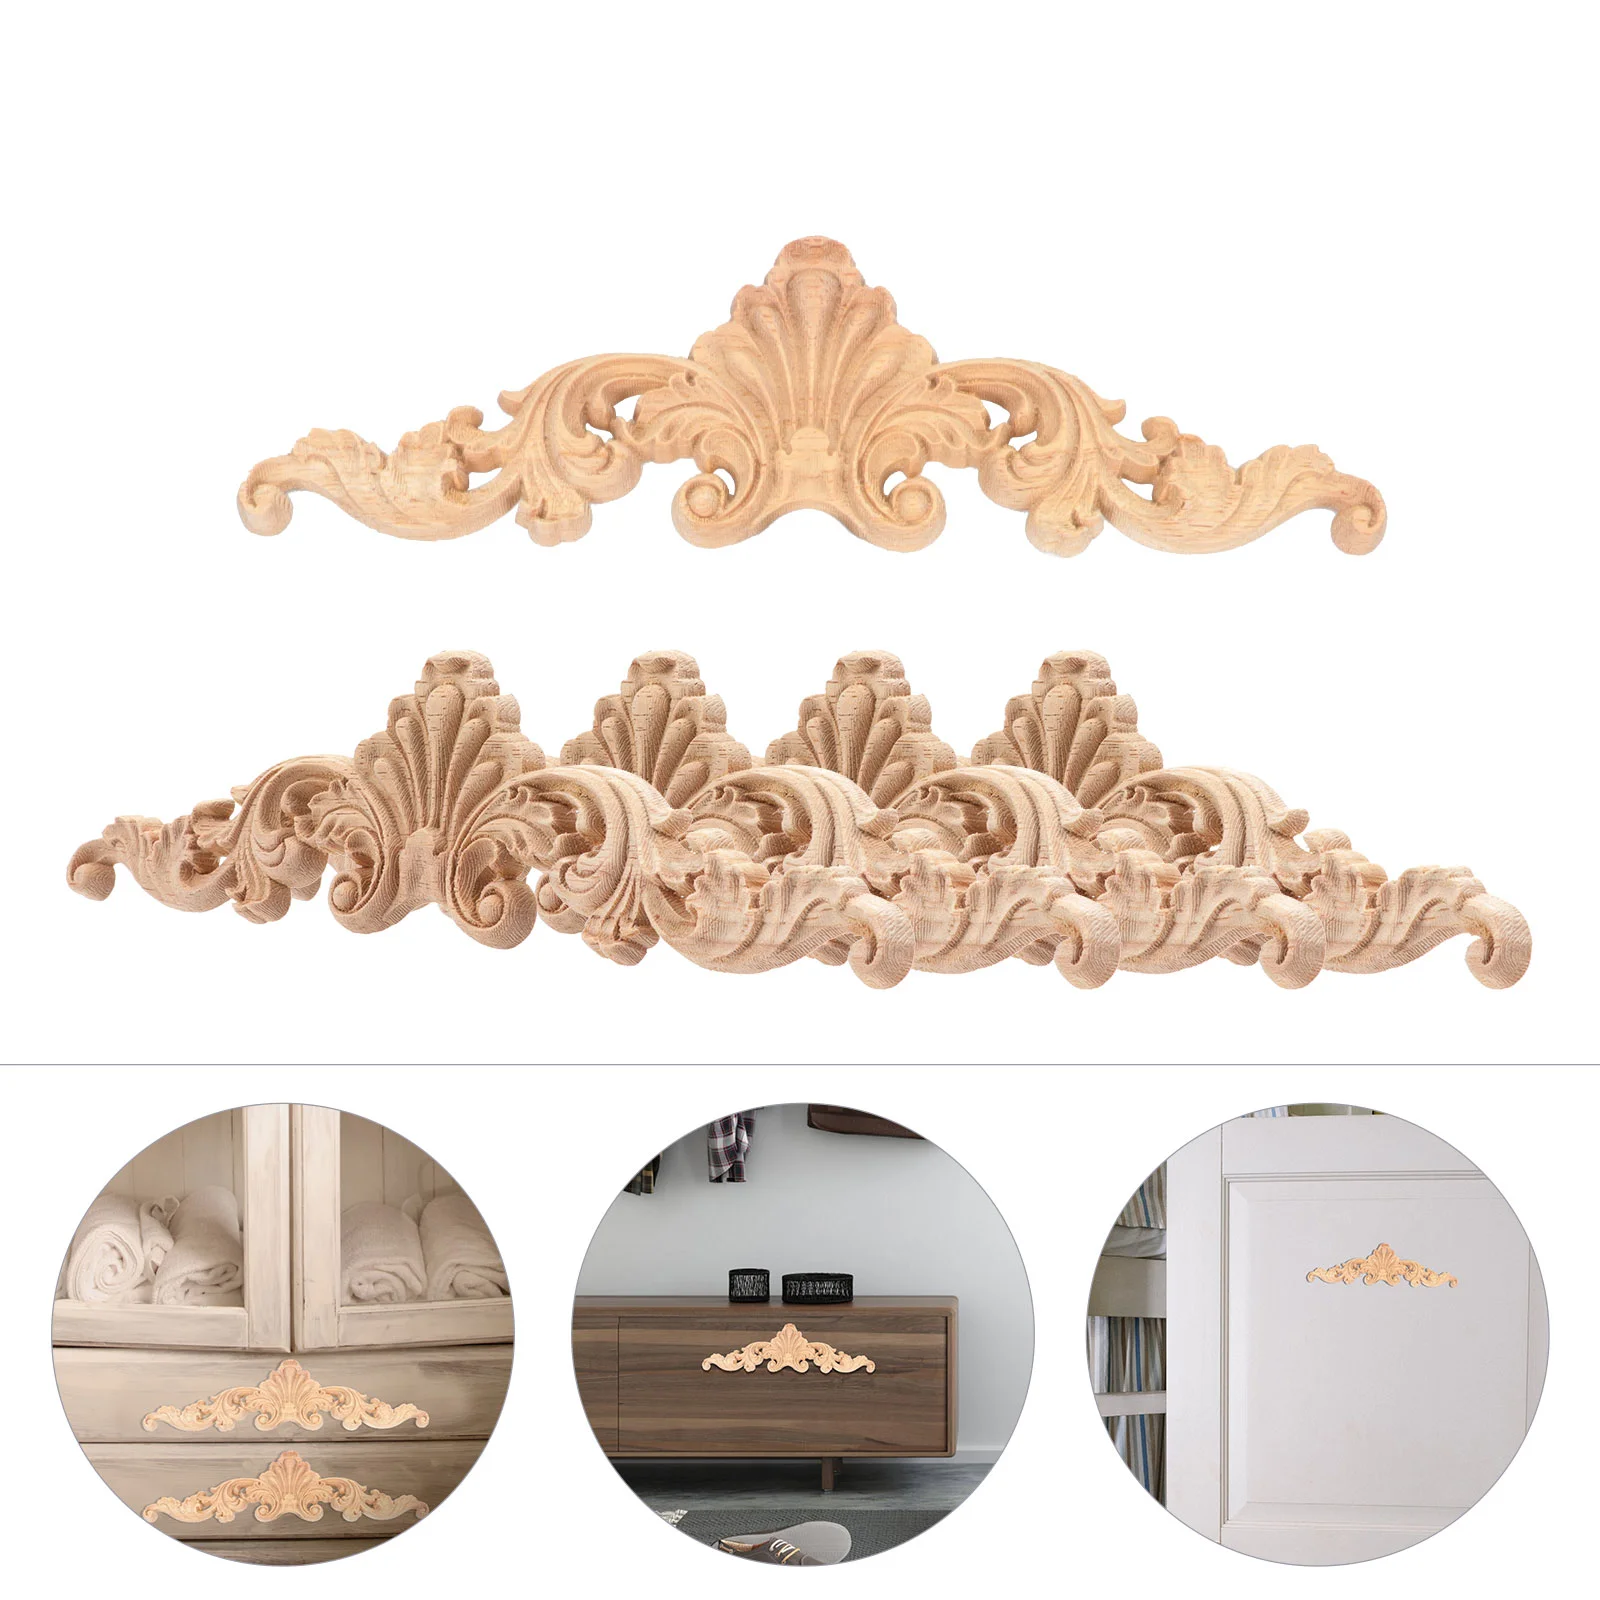 

6 Pcs Home Decor Furniture Decals Wood Onlay Unpainted Applique Frames Stickers Door Trim Accessories Solid Carved